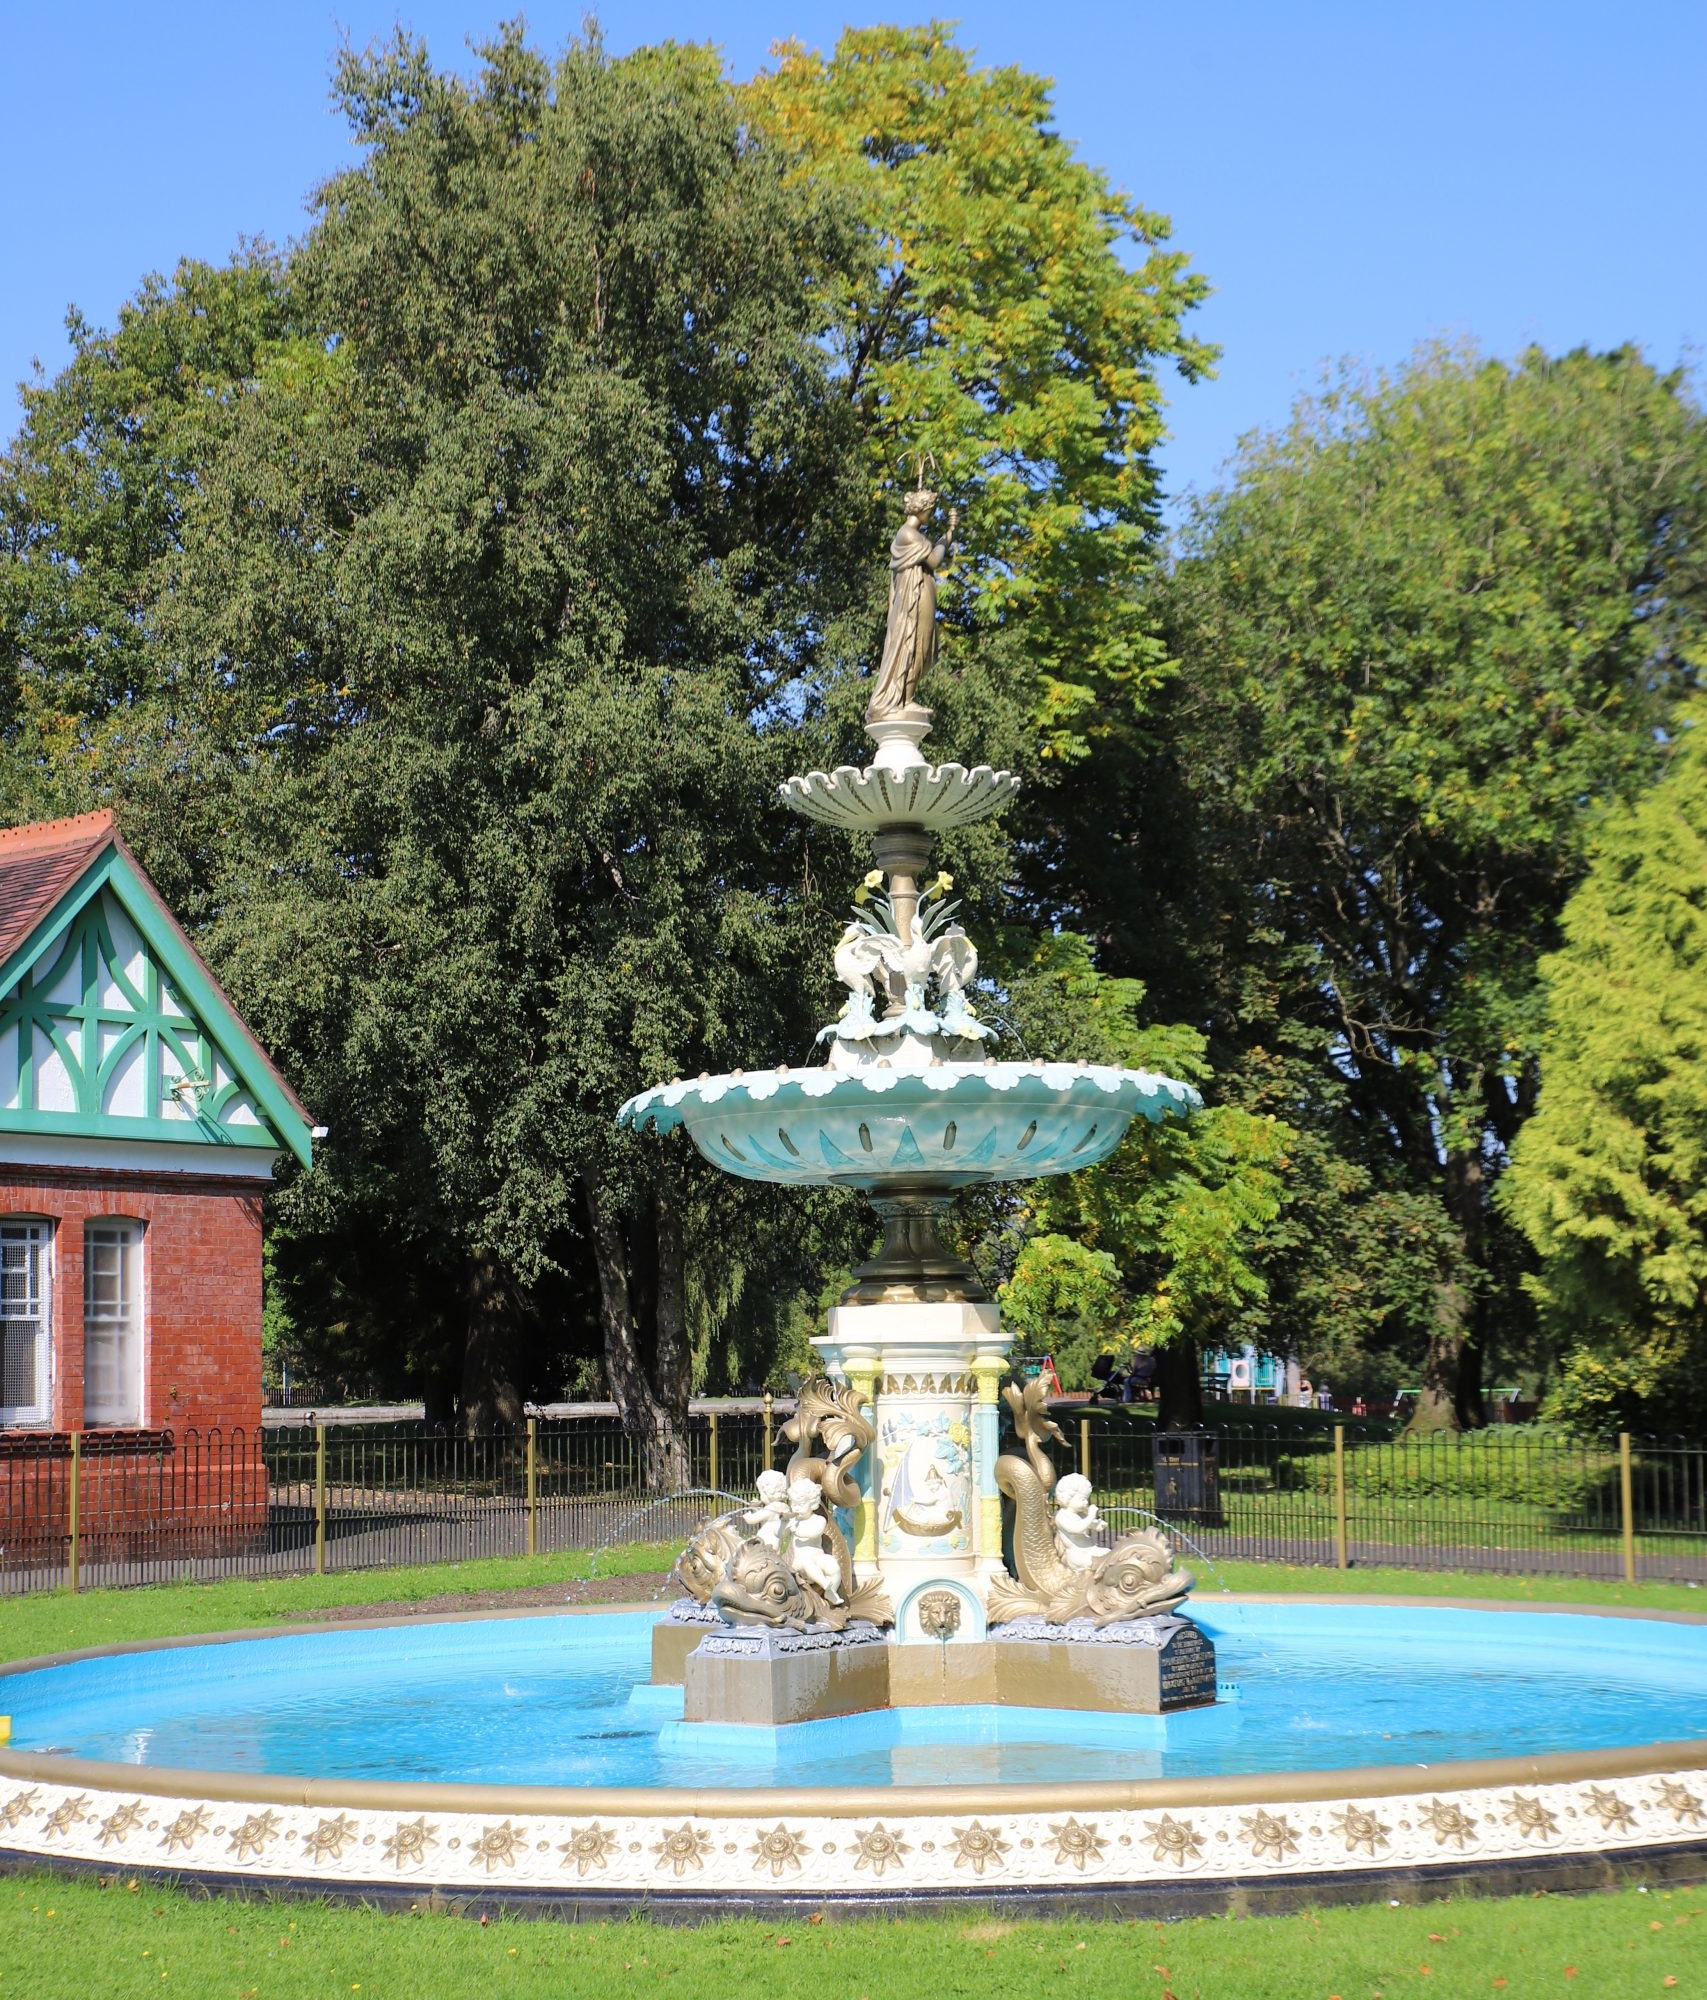 Fountain in park land with trees behind and clear blue sky above